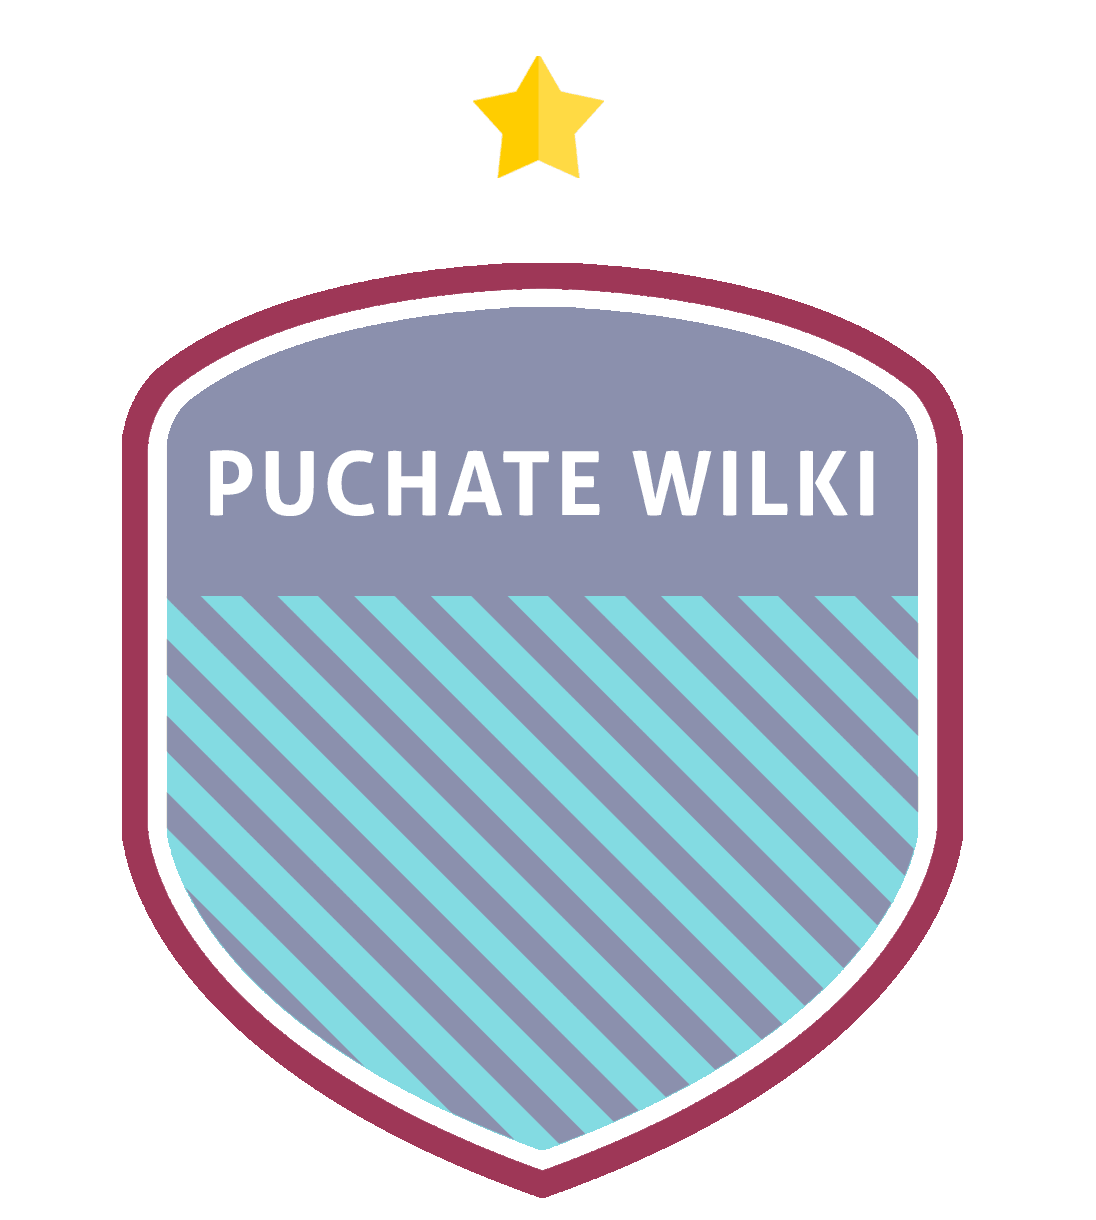 Puchate Wilki